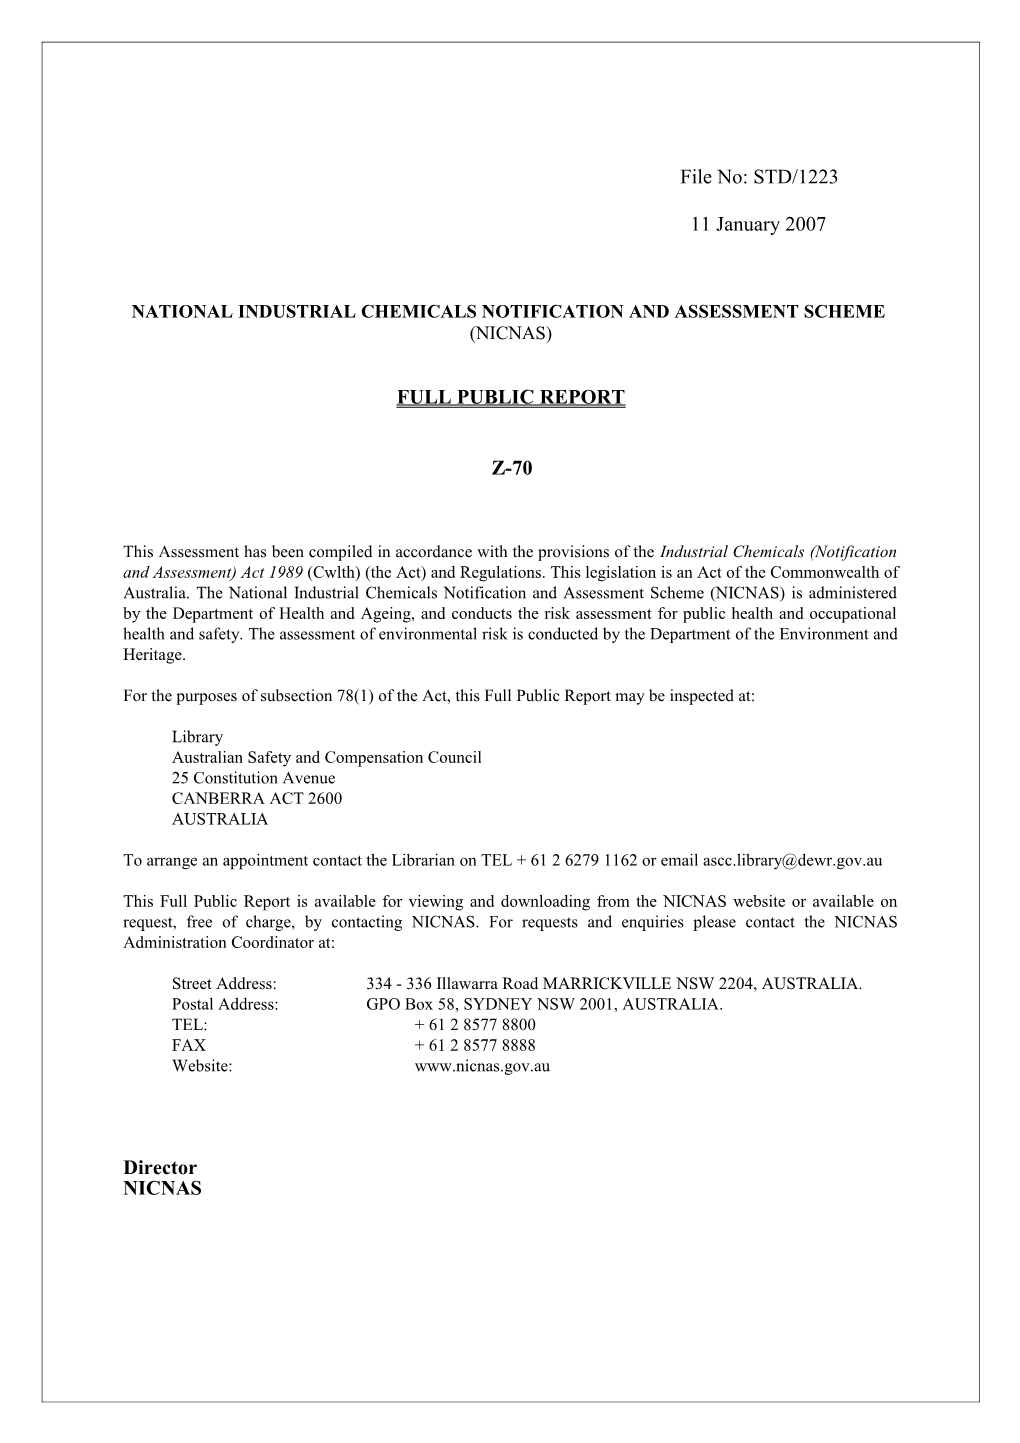 National Industrial Chemicals Notification and Assessment Scheme s53